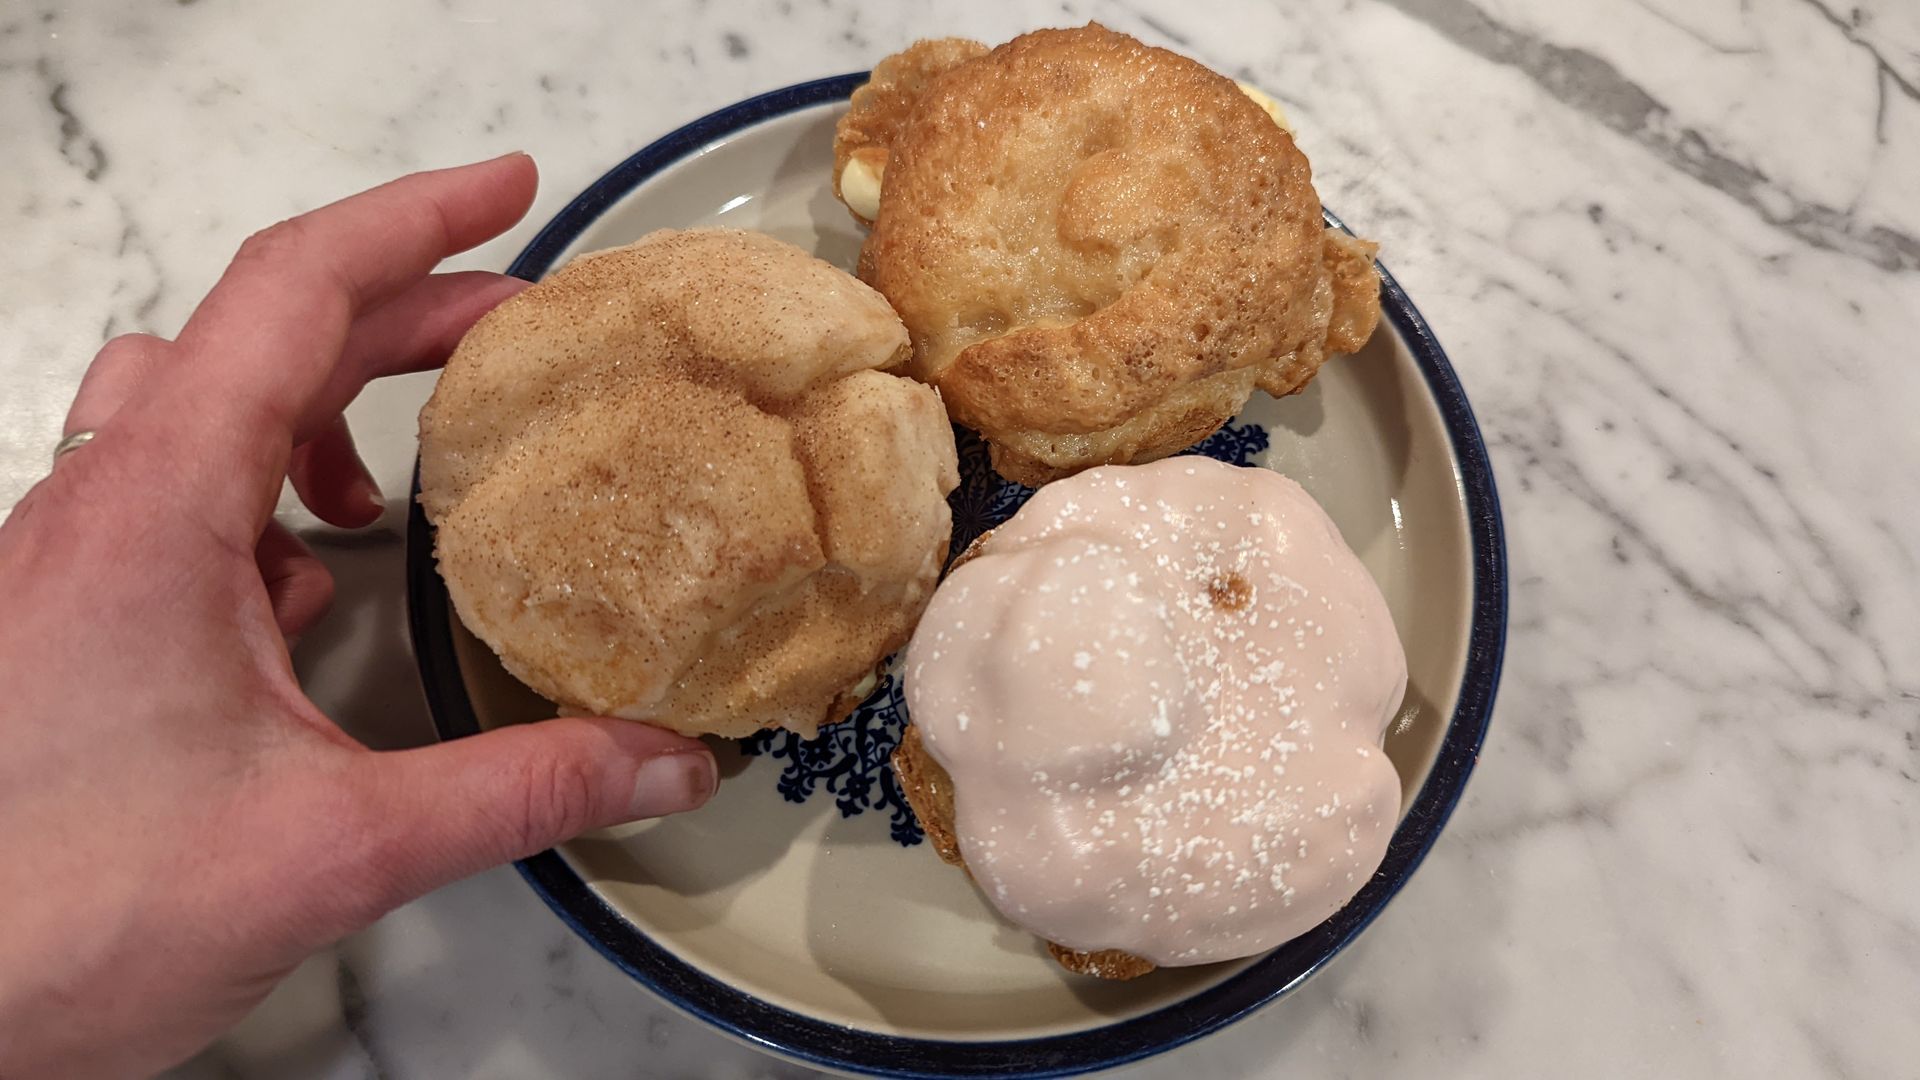 A person's hand holds a cream puff covered in cinnamon and sugar.